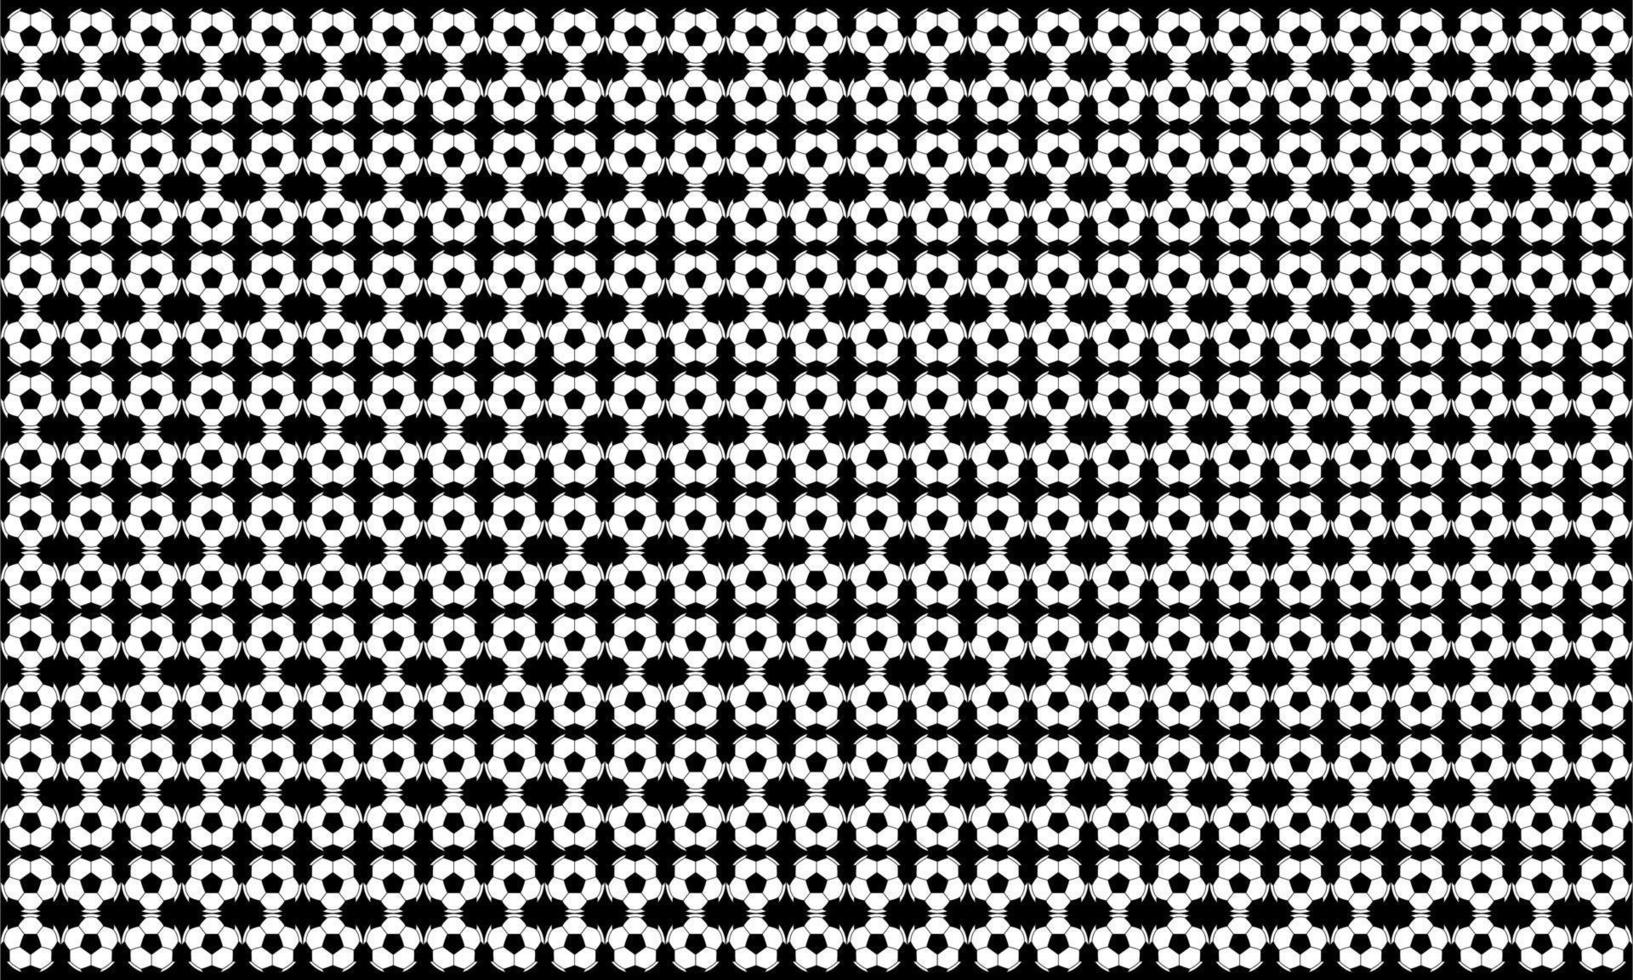 Seamless Motif Pattern Composed by Foot Ball or Soccer Ball Composition for Background, Pattern, Decoration, Ornate, Website or Graphic Design Element. Vector Illustration